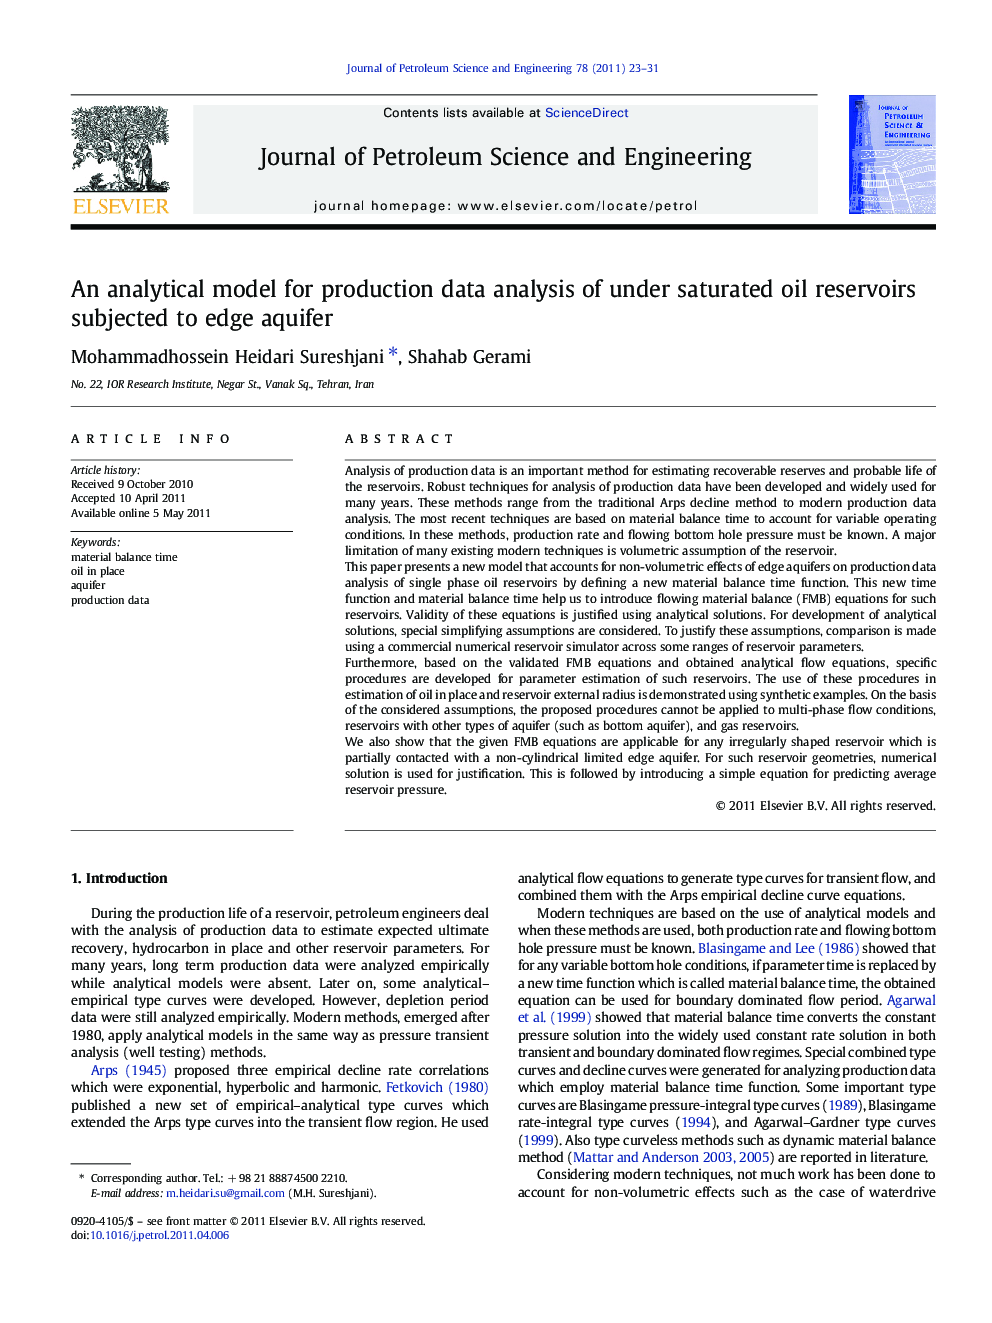 An analytical model for production data analysis of under saturated oil reservoirs subjected to edge aquifer